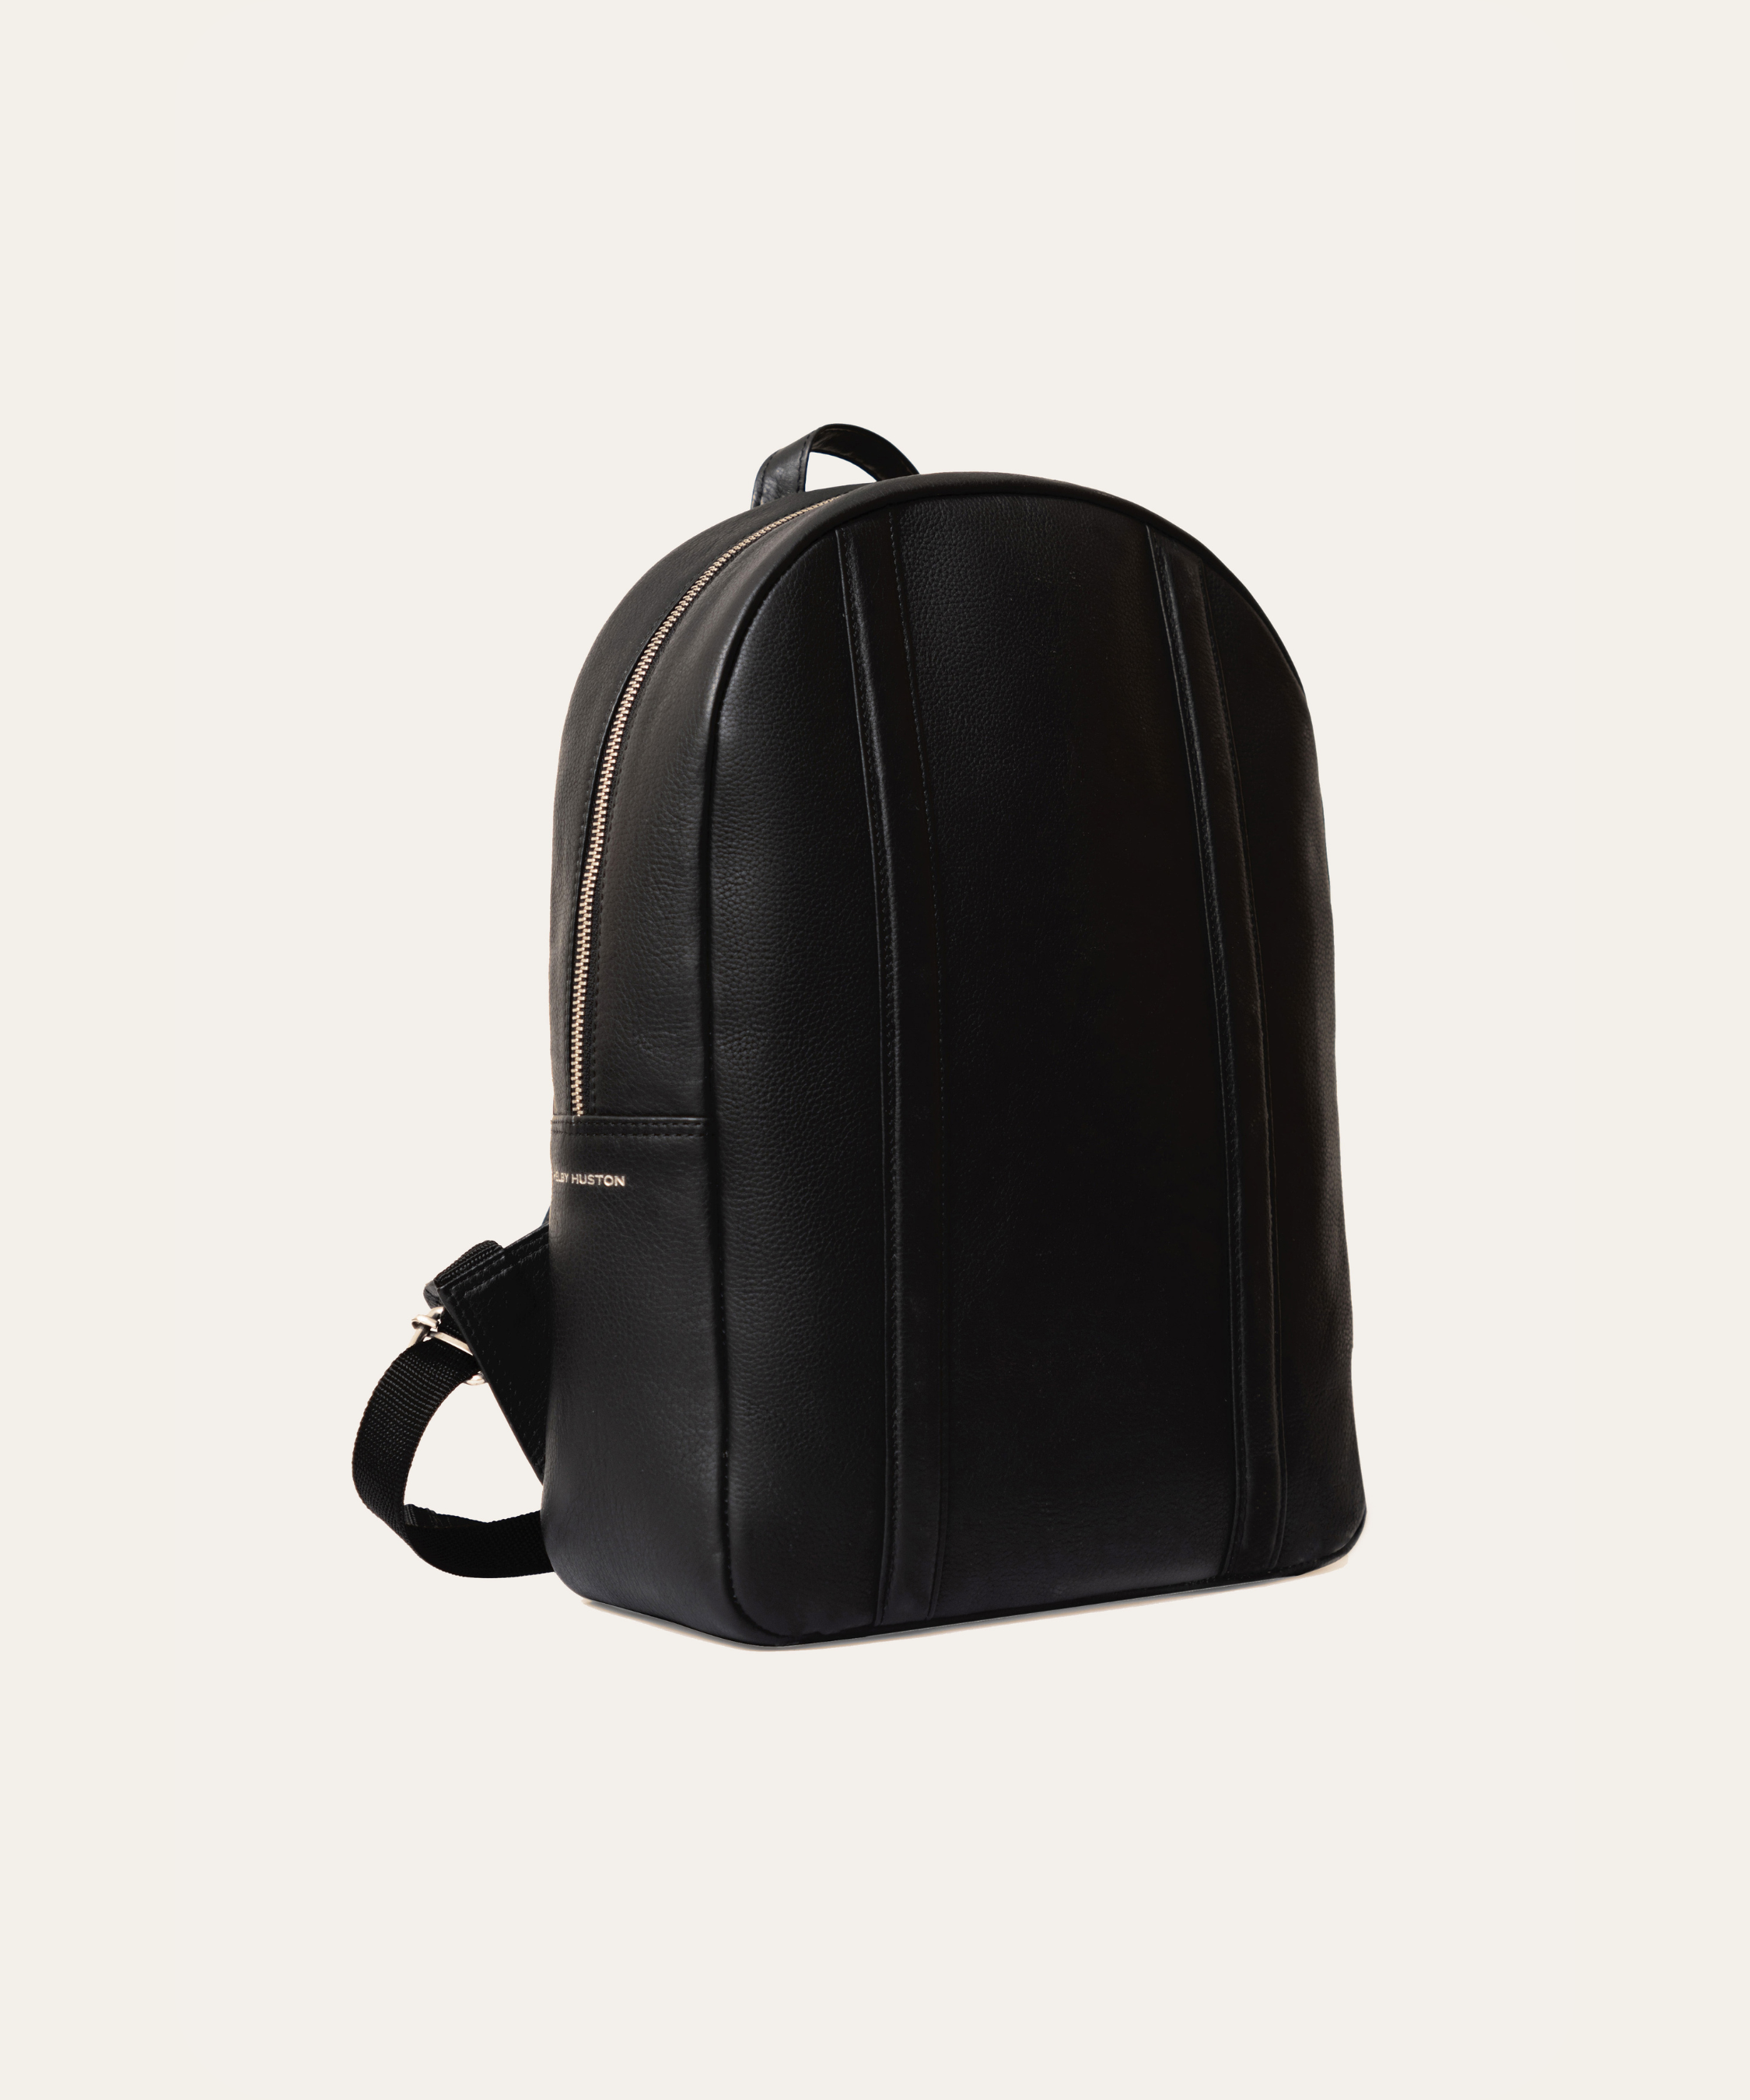 ABER BACKPACK - BLACK, a product by Kelby Huston